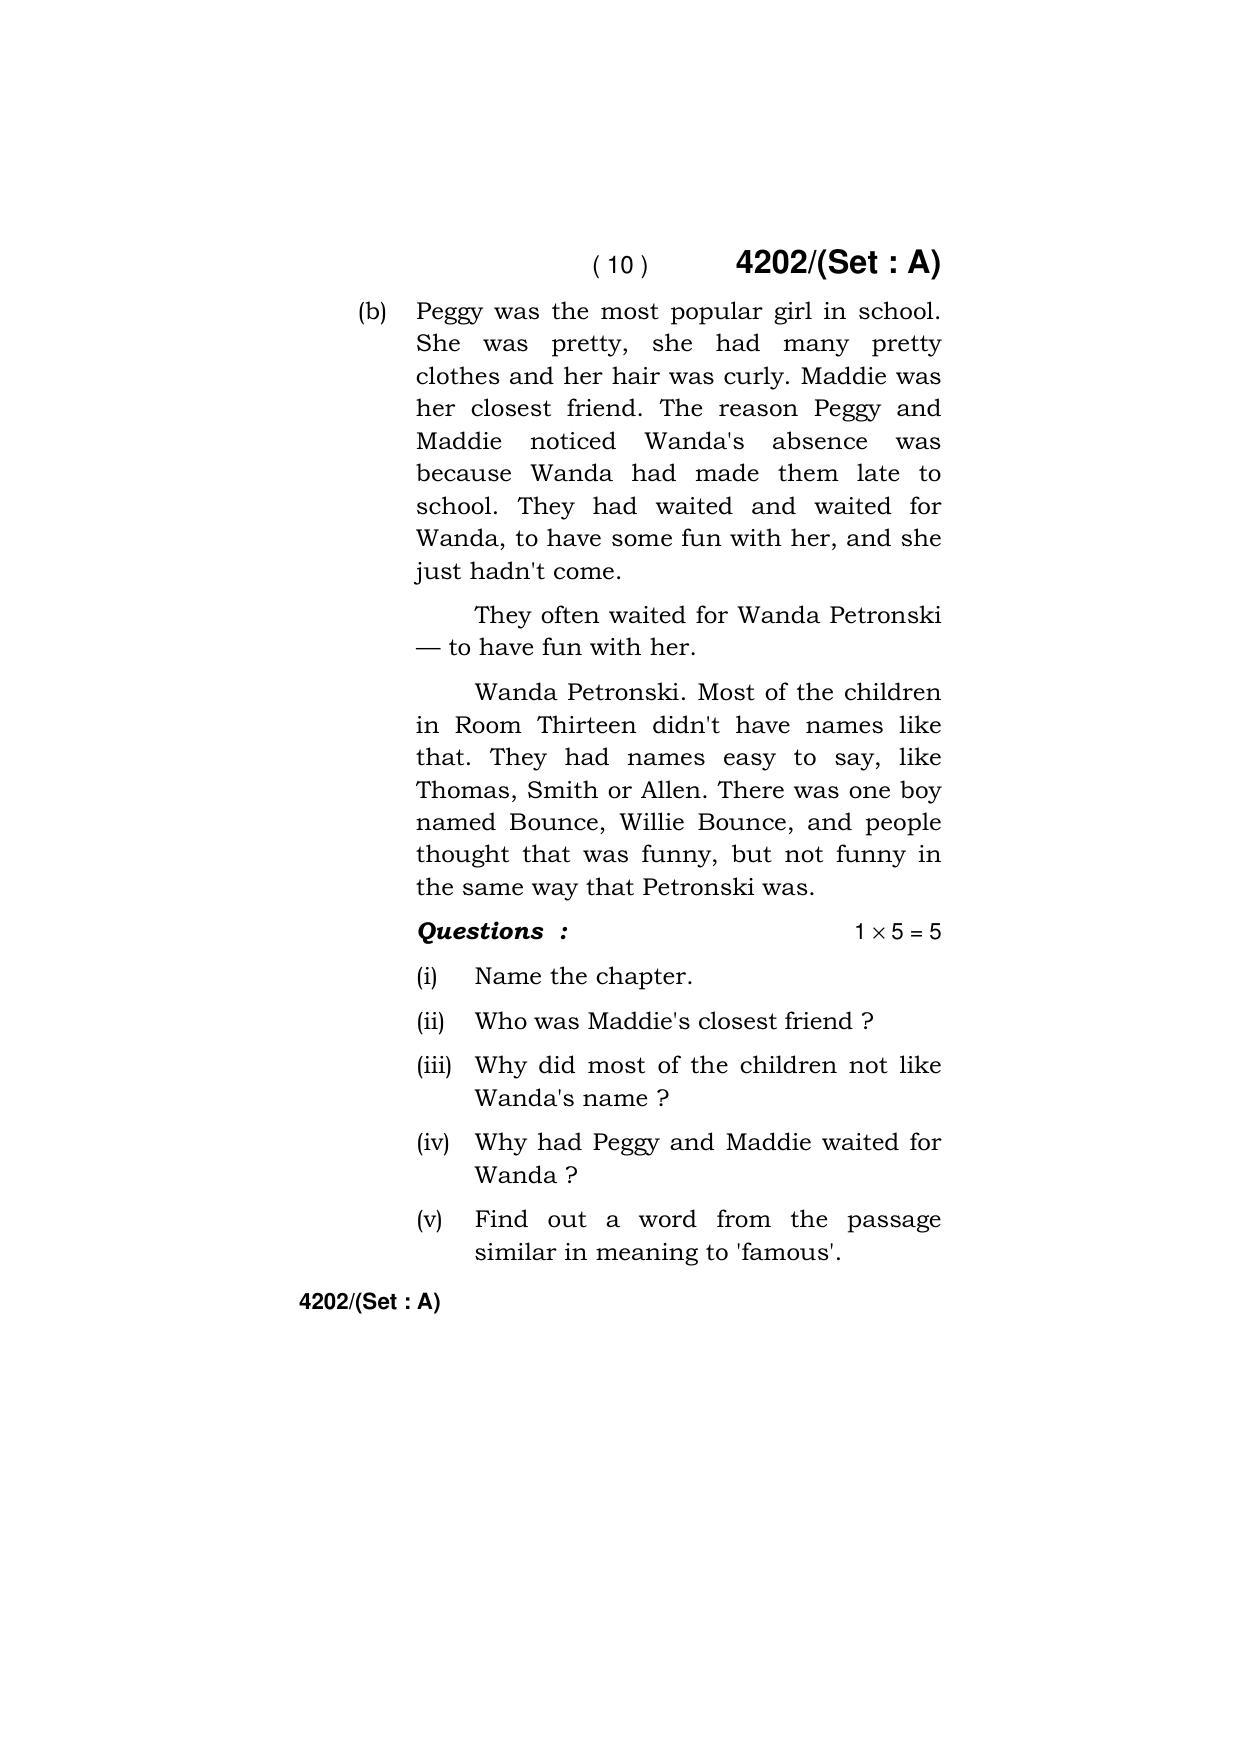 Haryana Board HBSE Class 10 English (All Set) 2019 Question Paper - Page 10